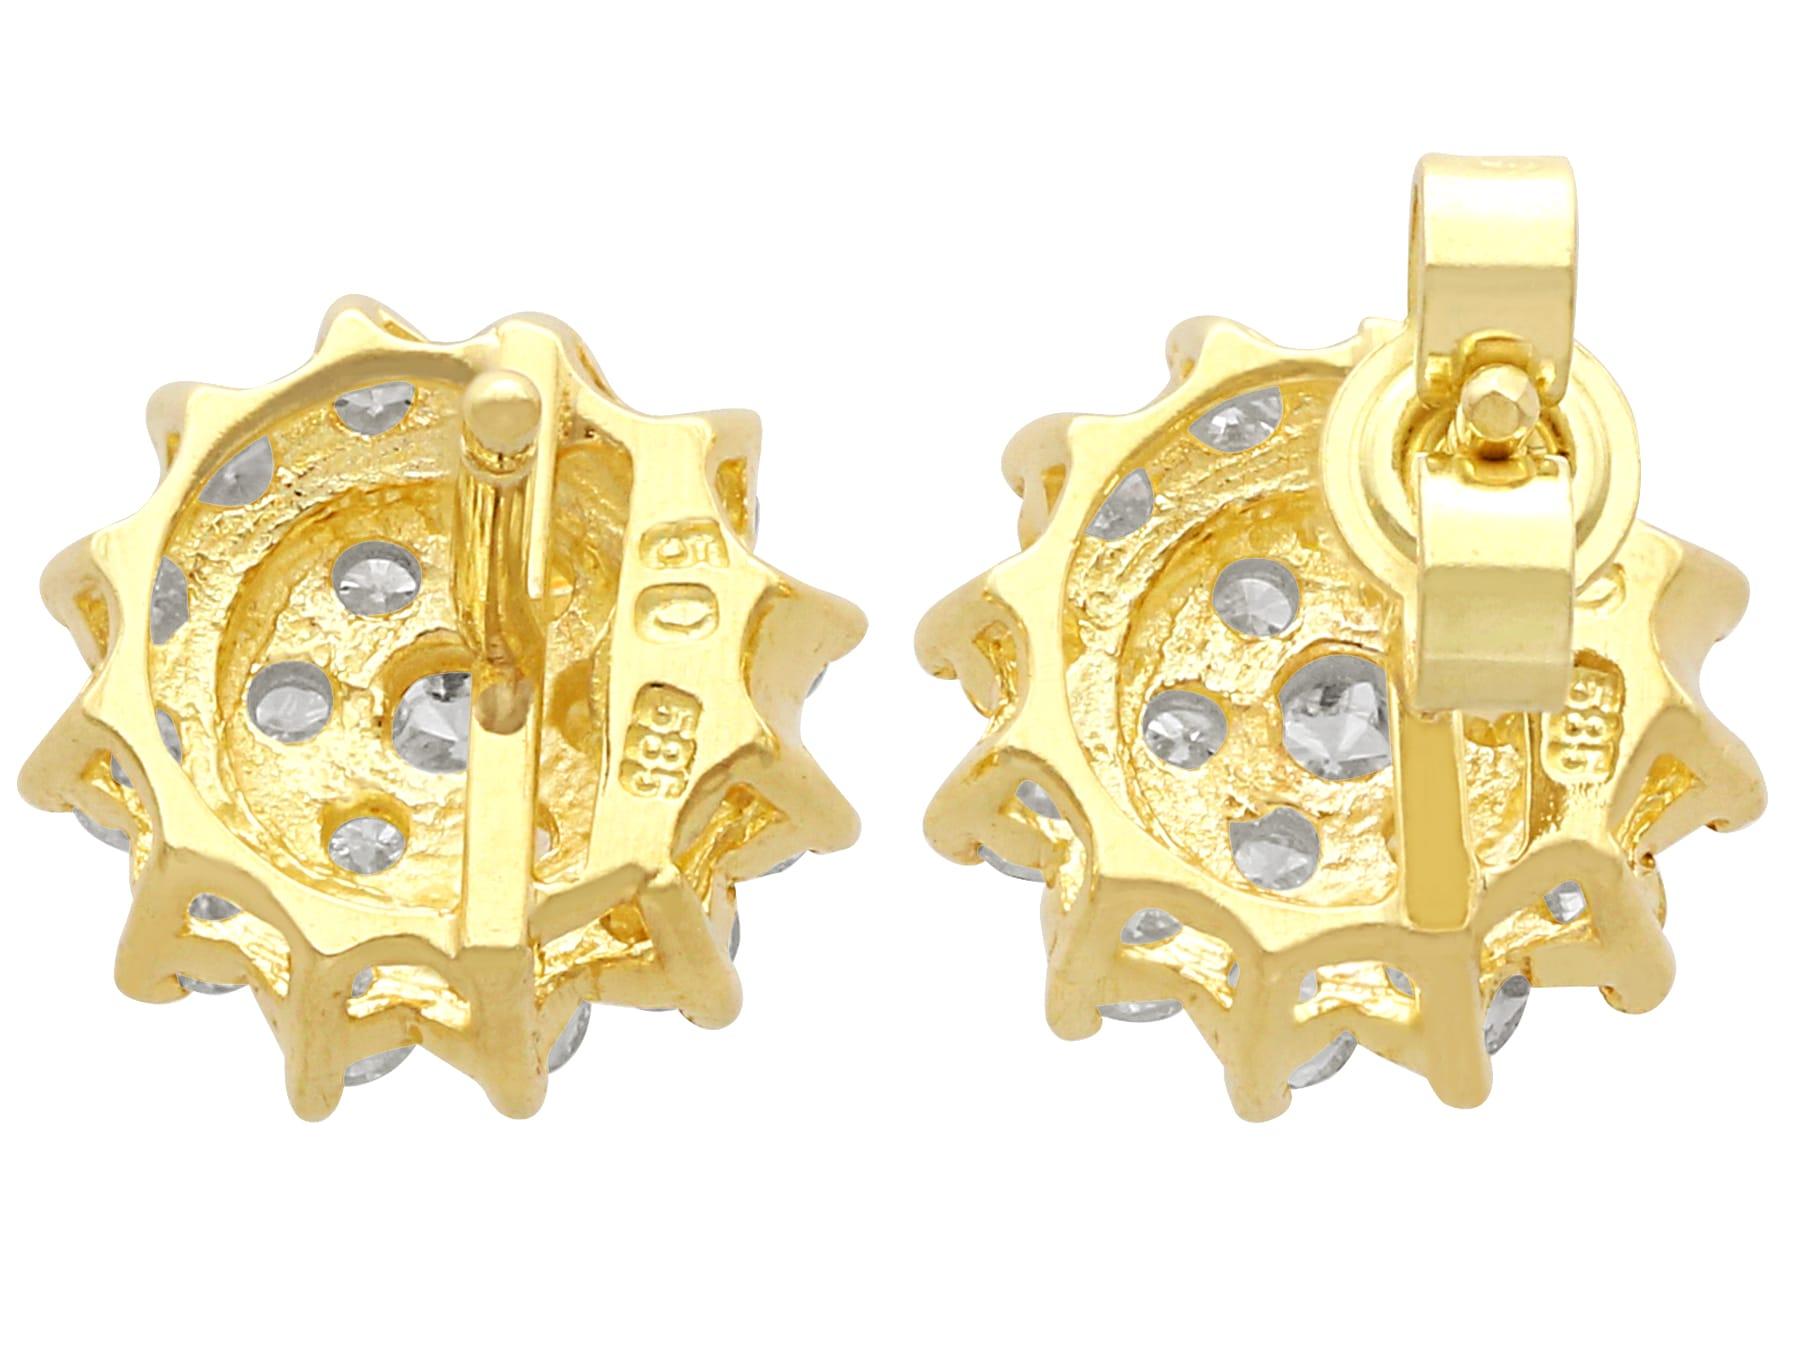 Vintage 1.00 Carat Diamond and 14k Yellow Gold Cluster Stud Earrings In Excellent Condition For Sale In Jesmond, Newcastle Upon Tyne